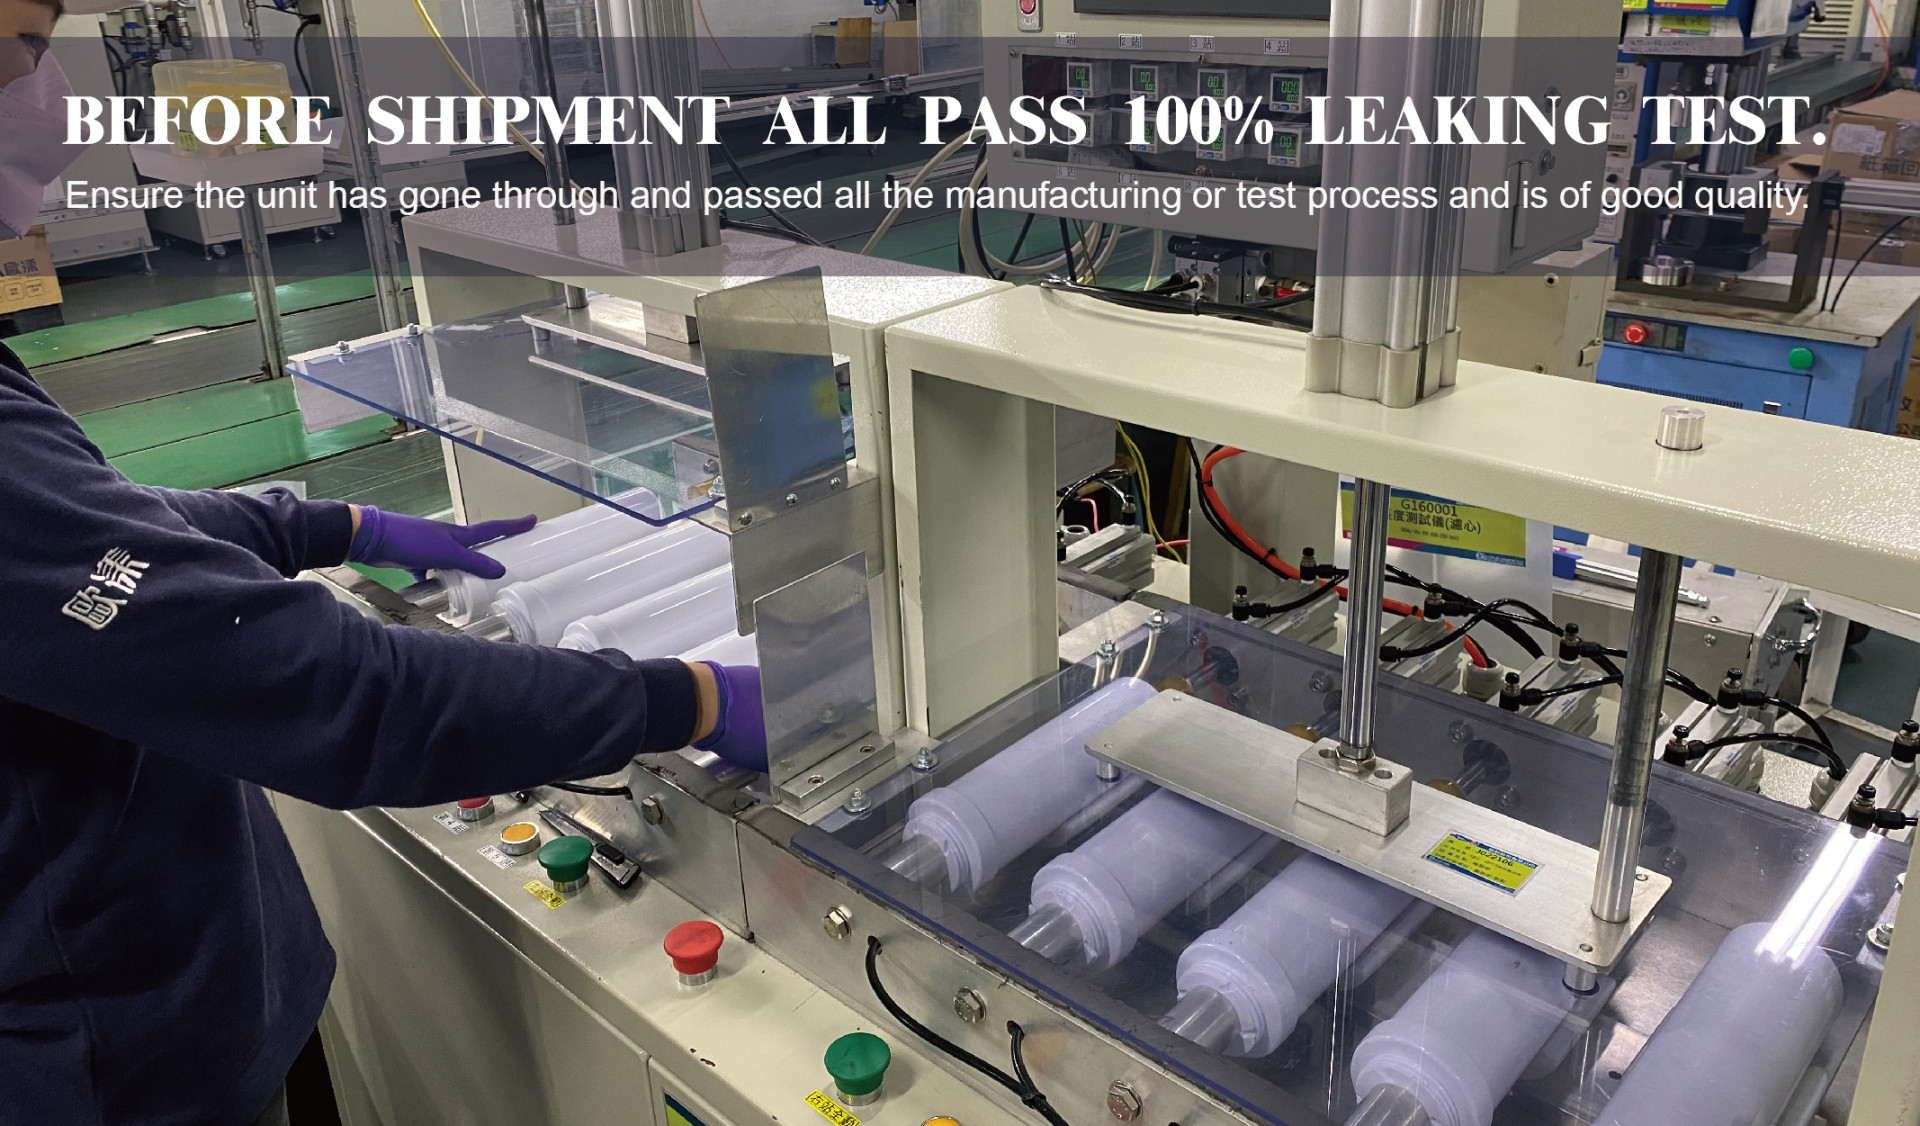 BEFORE SHIPMENT ALL PASS 100% LEAKING TEST